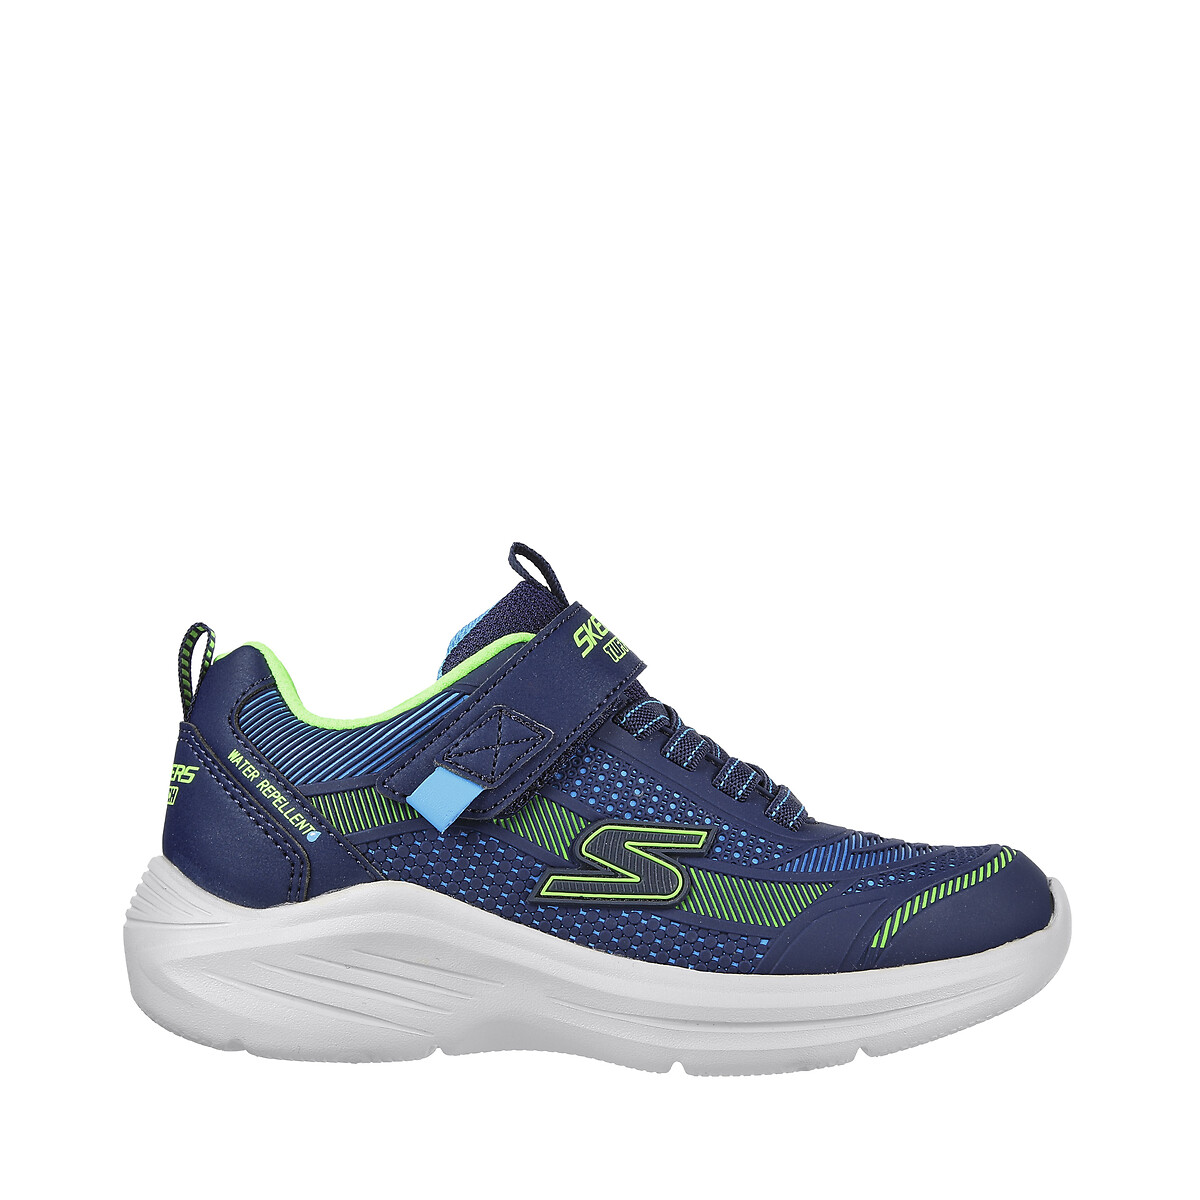 Image of Kids Hyper-Blitz Trainers with Touch 'n' Close Fastening